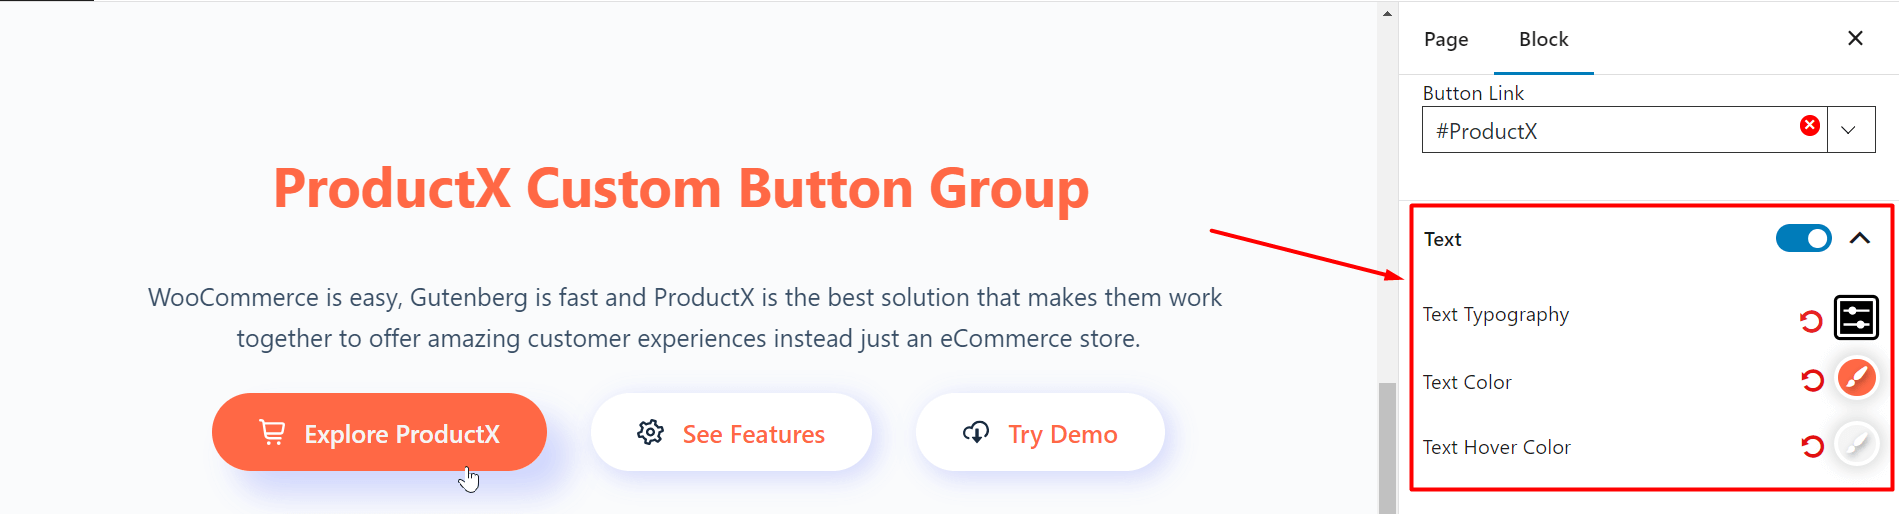 Button group text settings 